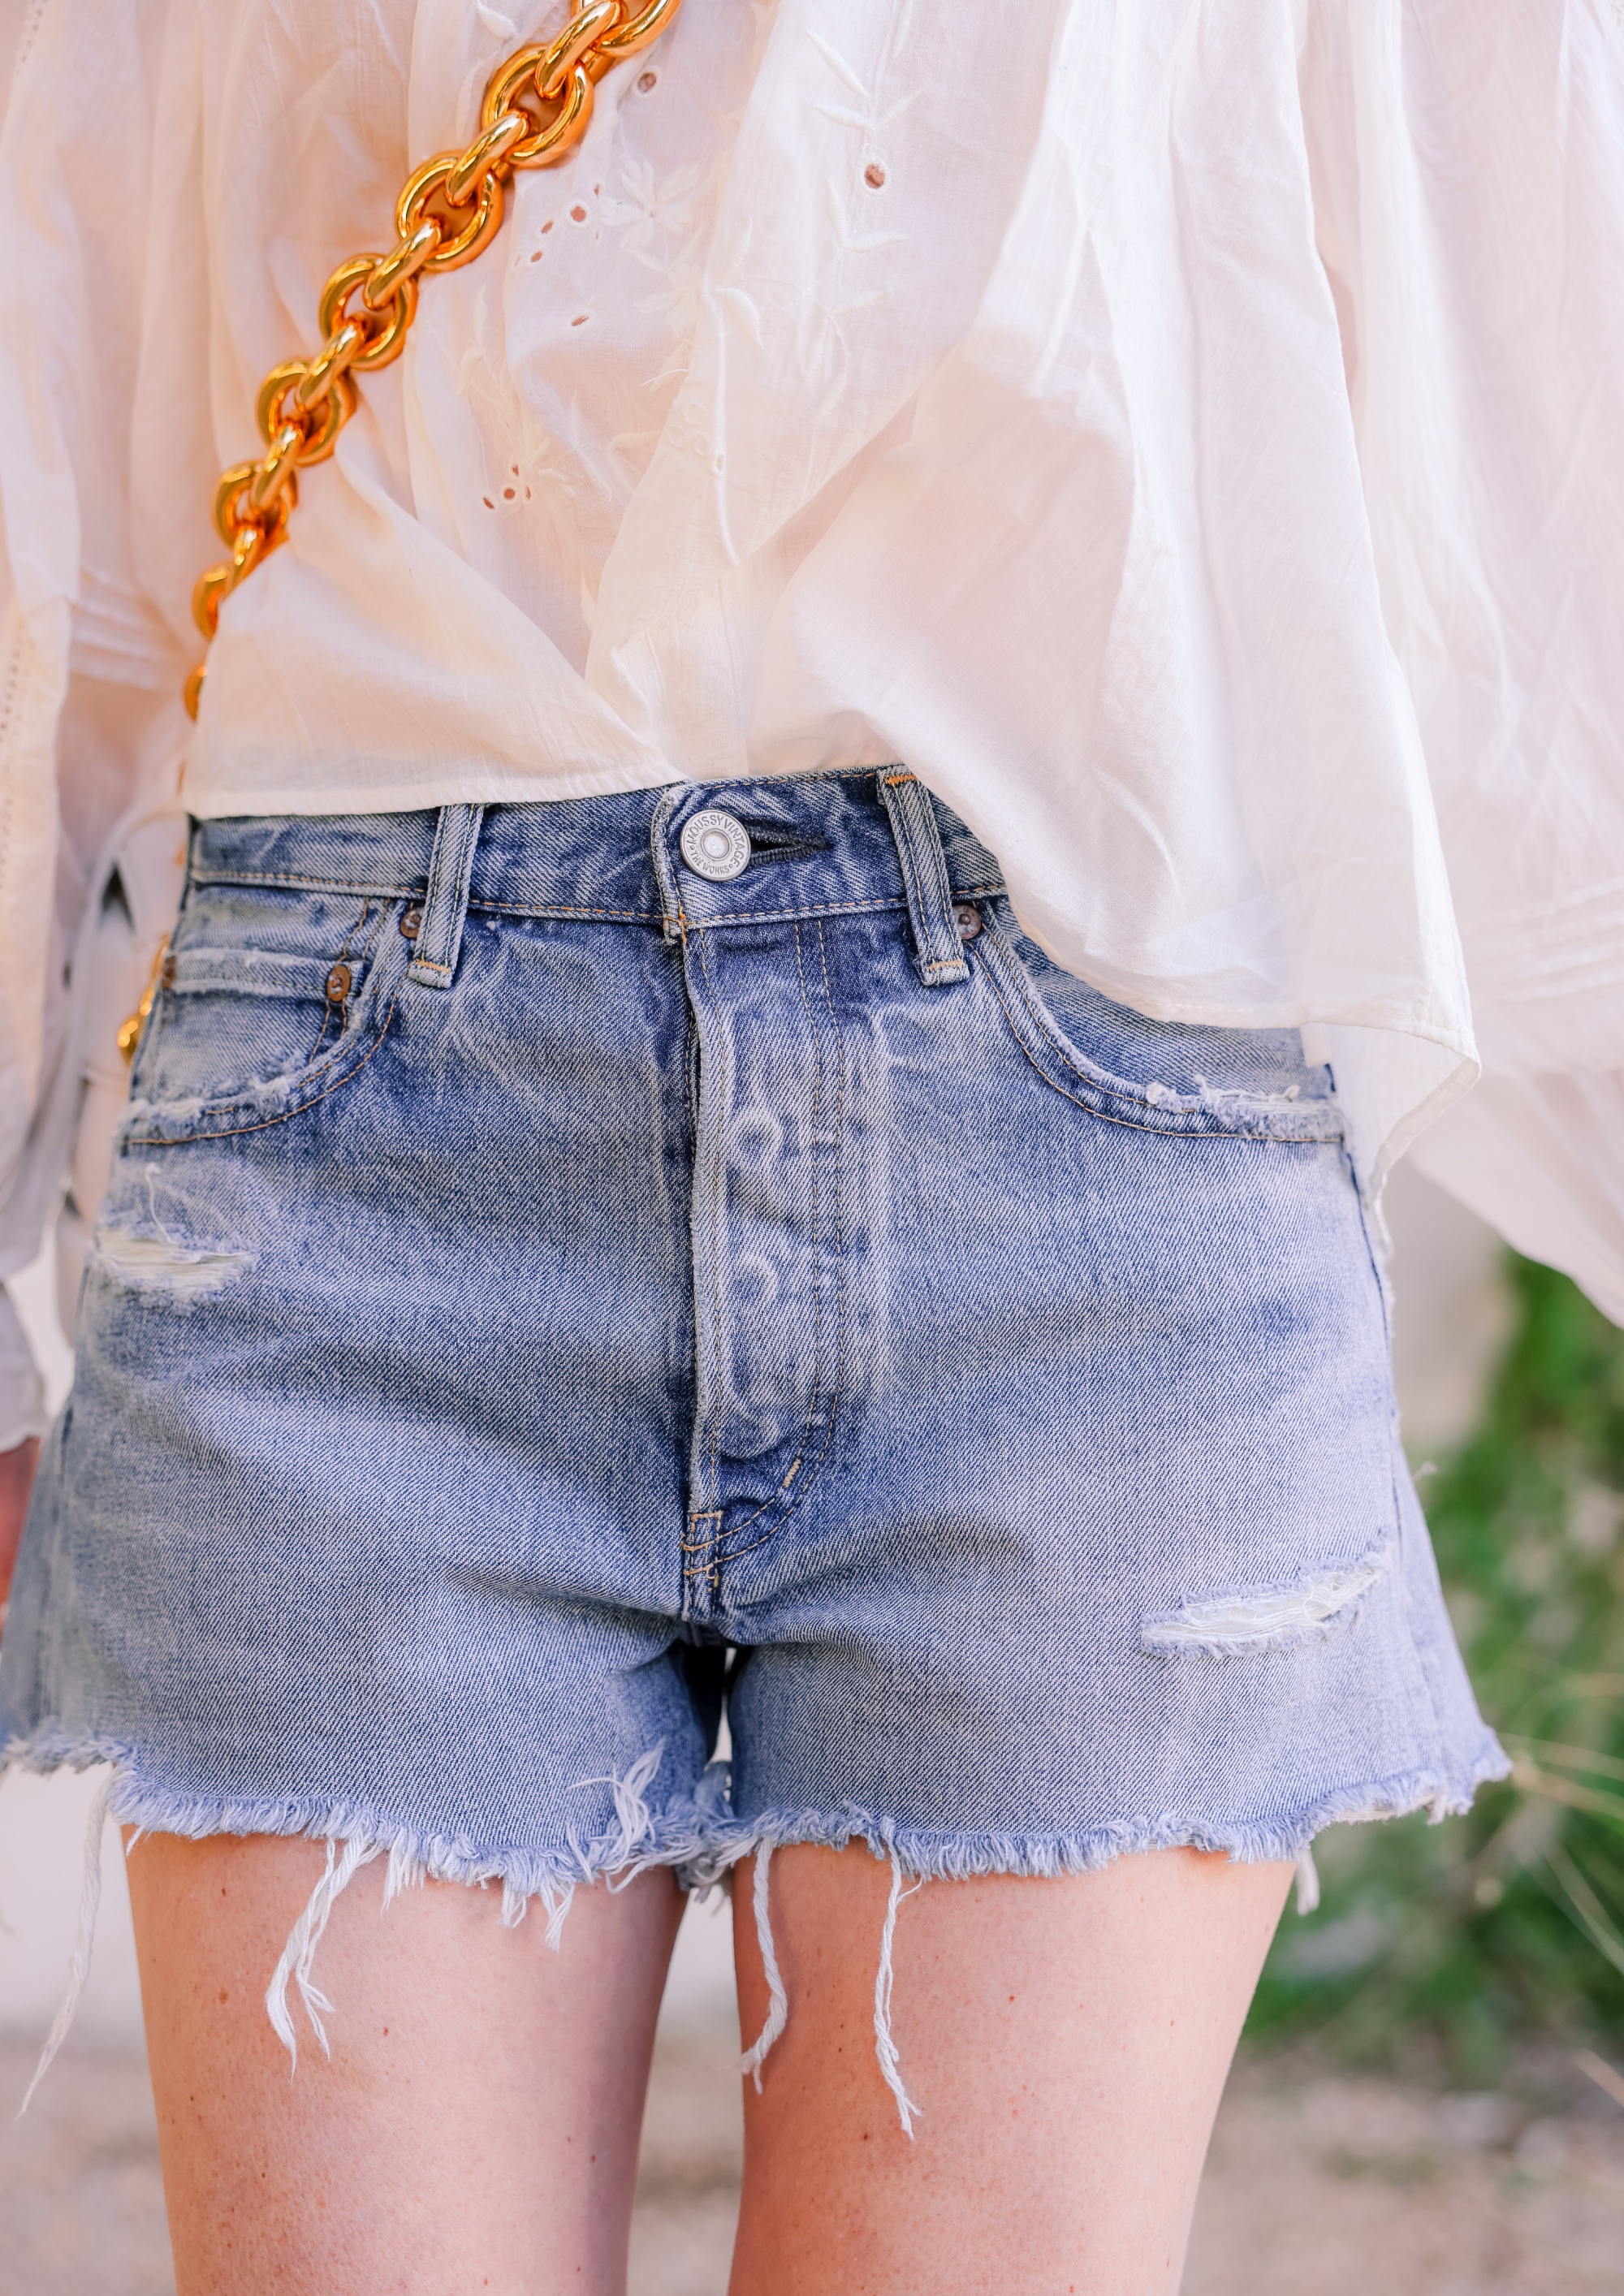 Moussy Vintage denim shorts, Erin Busbee, jean shorts, how should denim shorts fit, shorts for middle aged woman, how to wear shorts over 40, length of shorts womens, shorts inseam guide womens, are my shorts too short, jean shorts outfit, cute shorts, mom shorts outfit